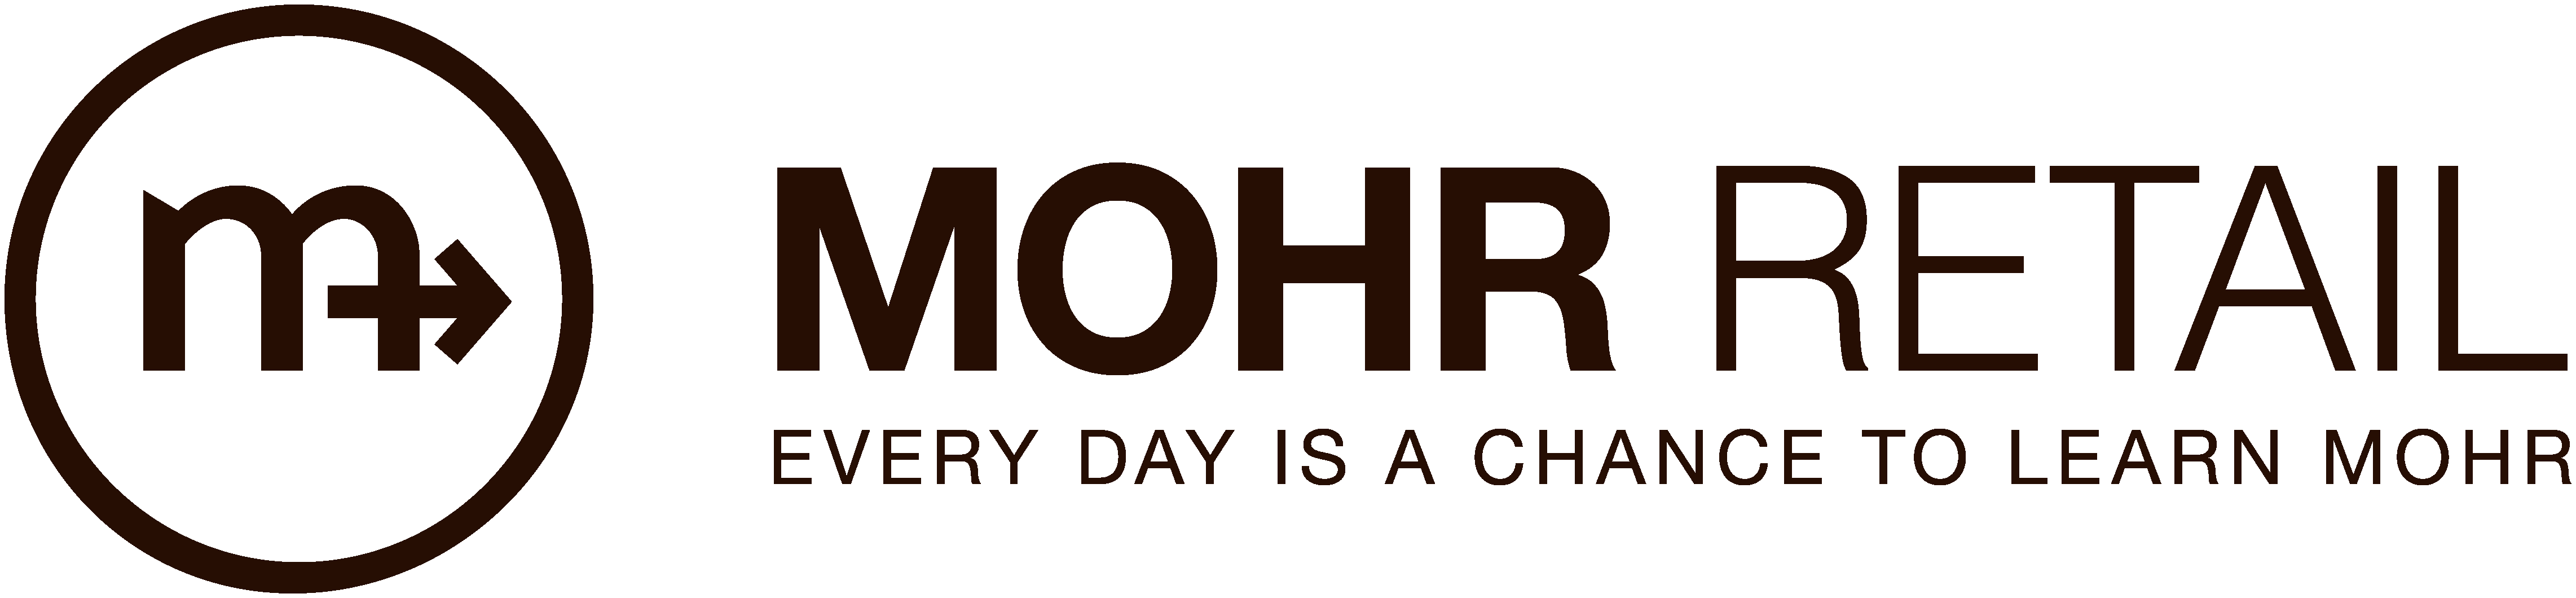 MOHR Retail Logo with Tag_1C